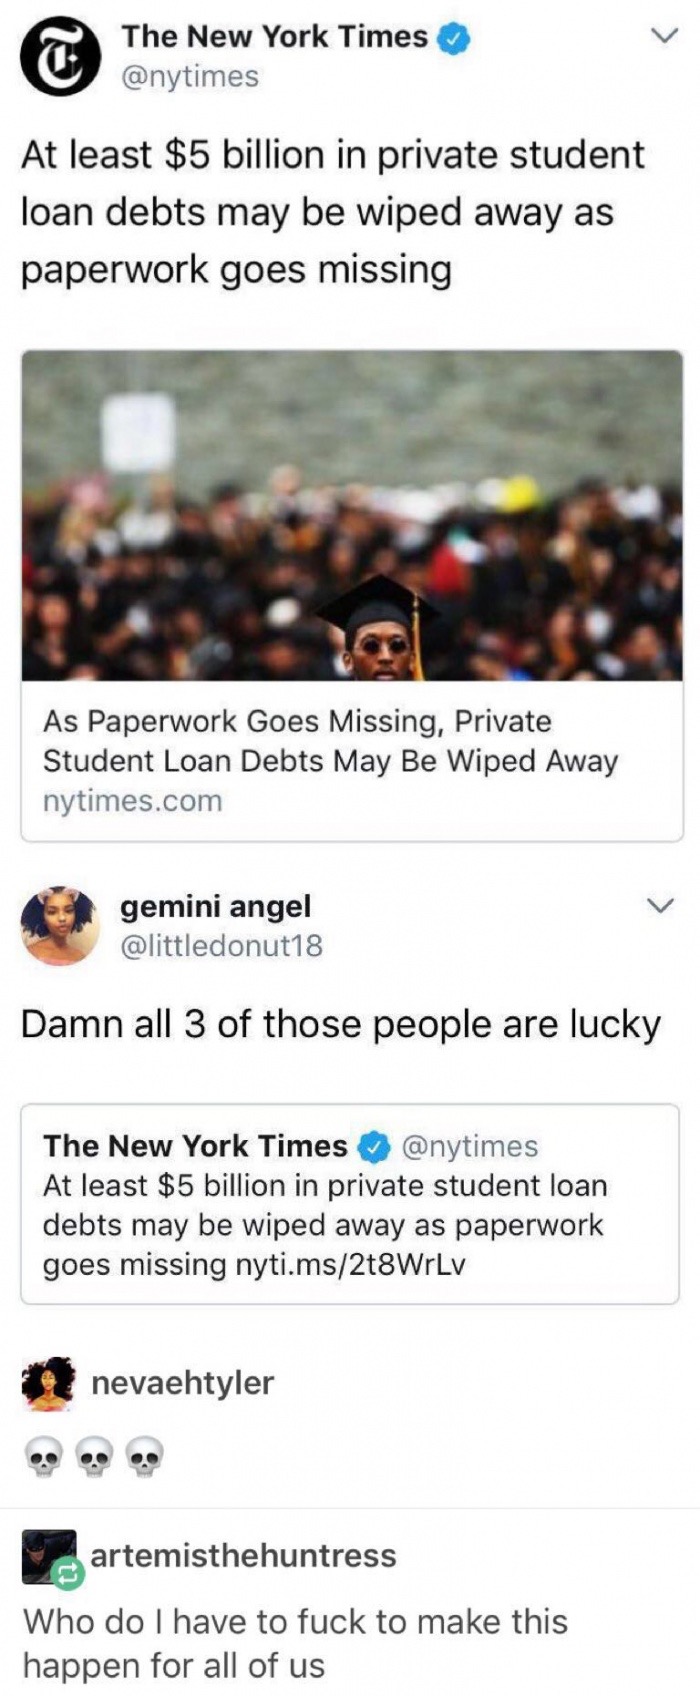 web page - The New York Times At least $5 billion in private student loan debts may be wiped away as paperwork goes missing As Paperwork Goes Missing, Private Student Loan Debts May Be Wiped Away nytimes.com gemini angel Damn all 3 of those people are luc